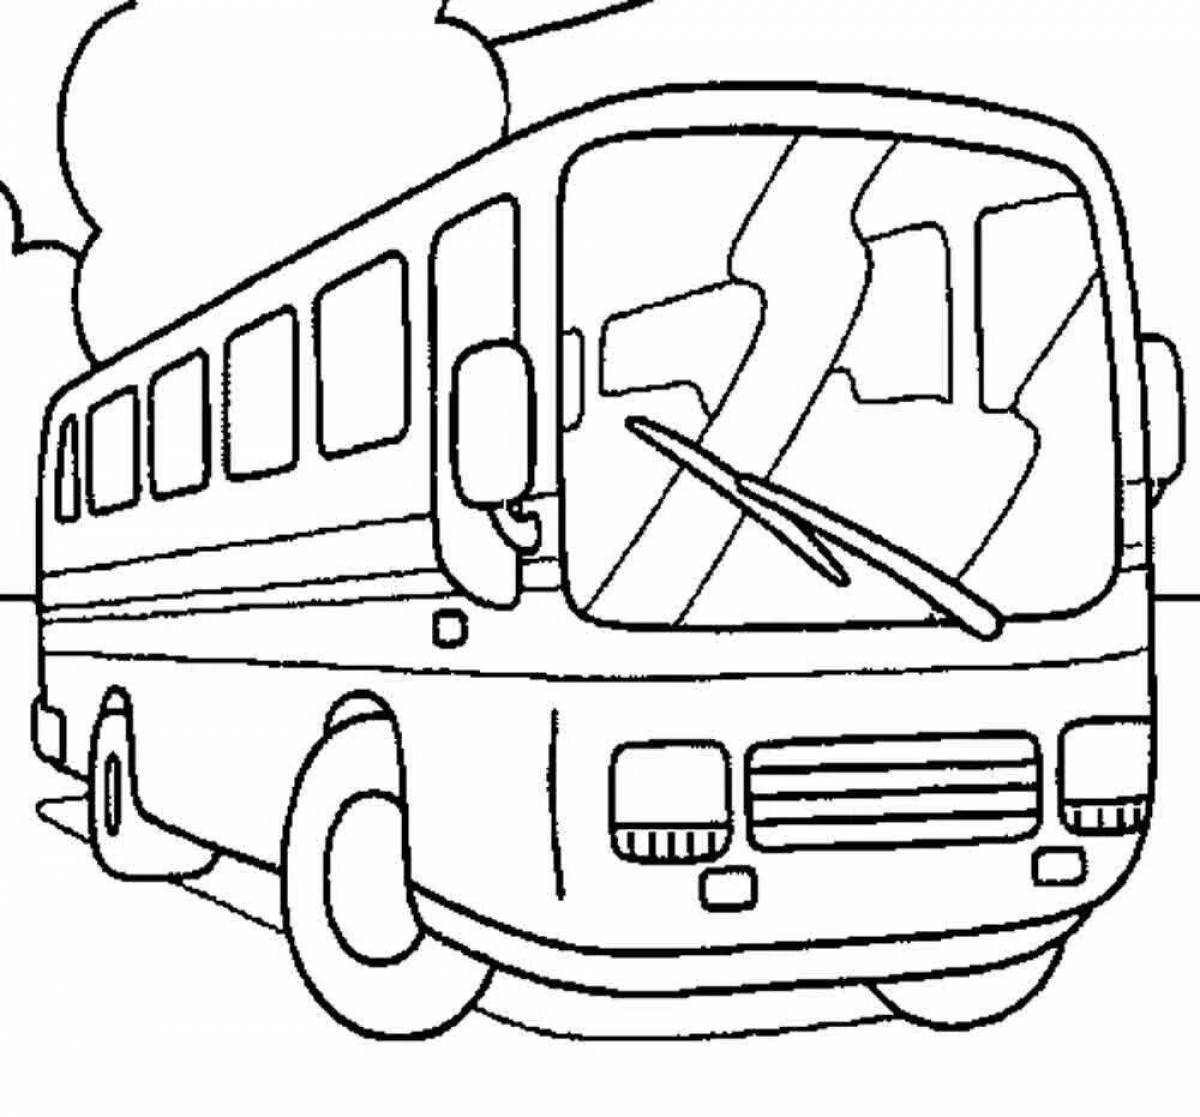 Coloring page energetic bus